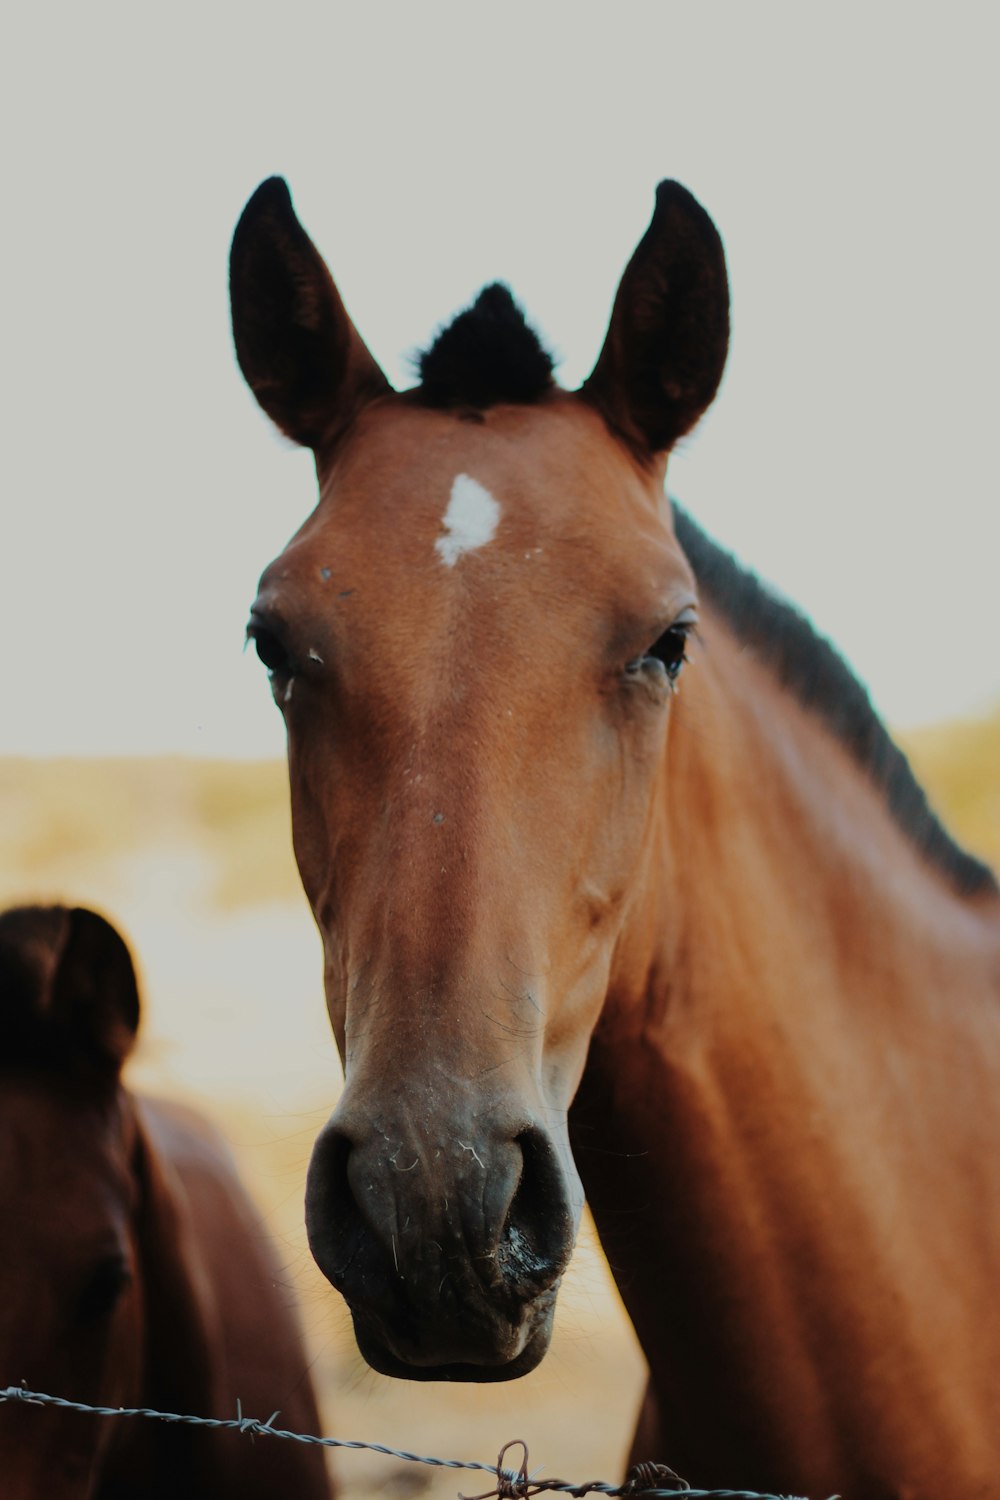 brown horse in close up photography during daytime